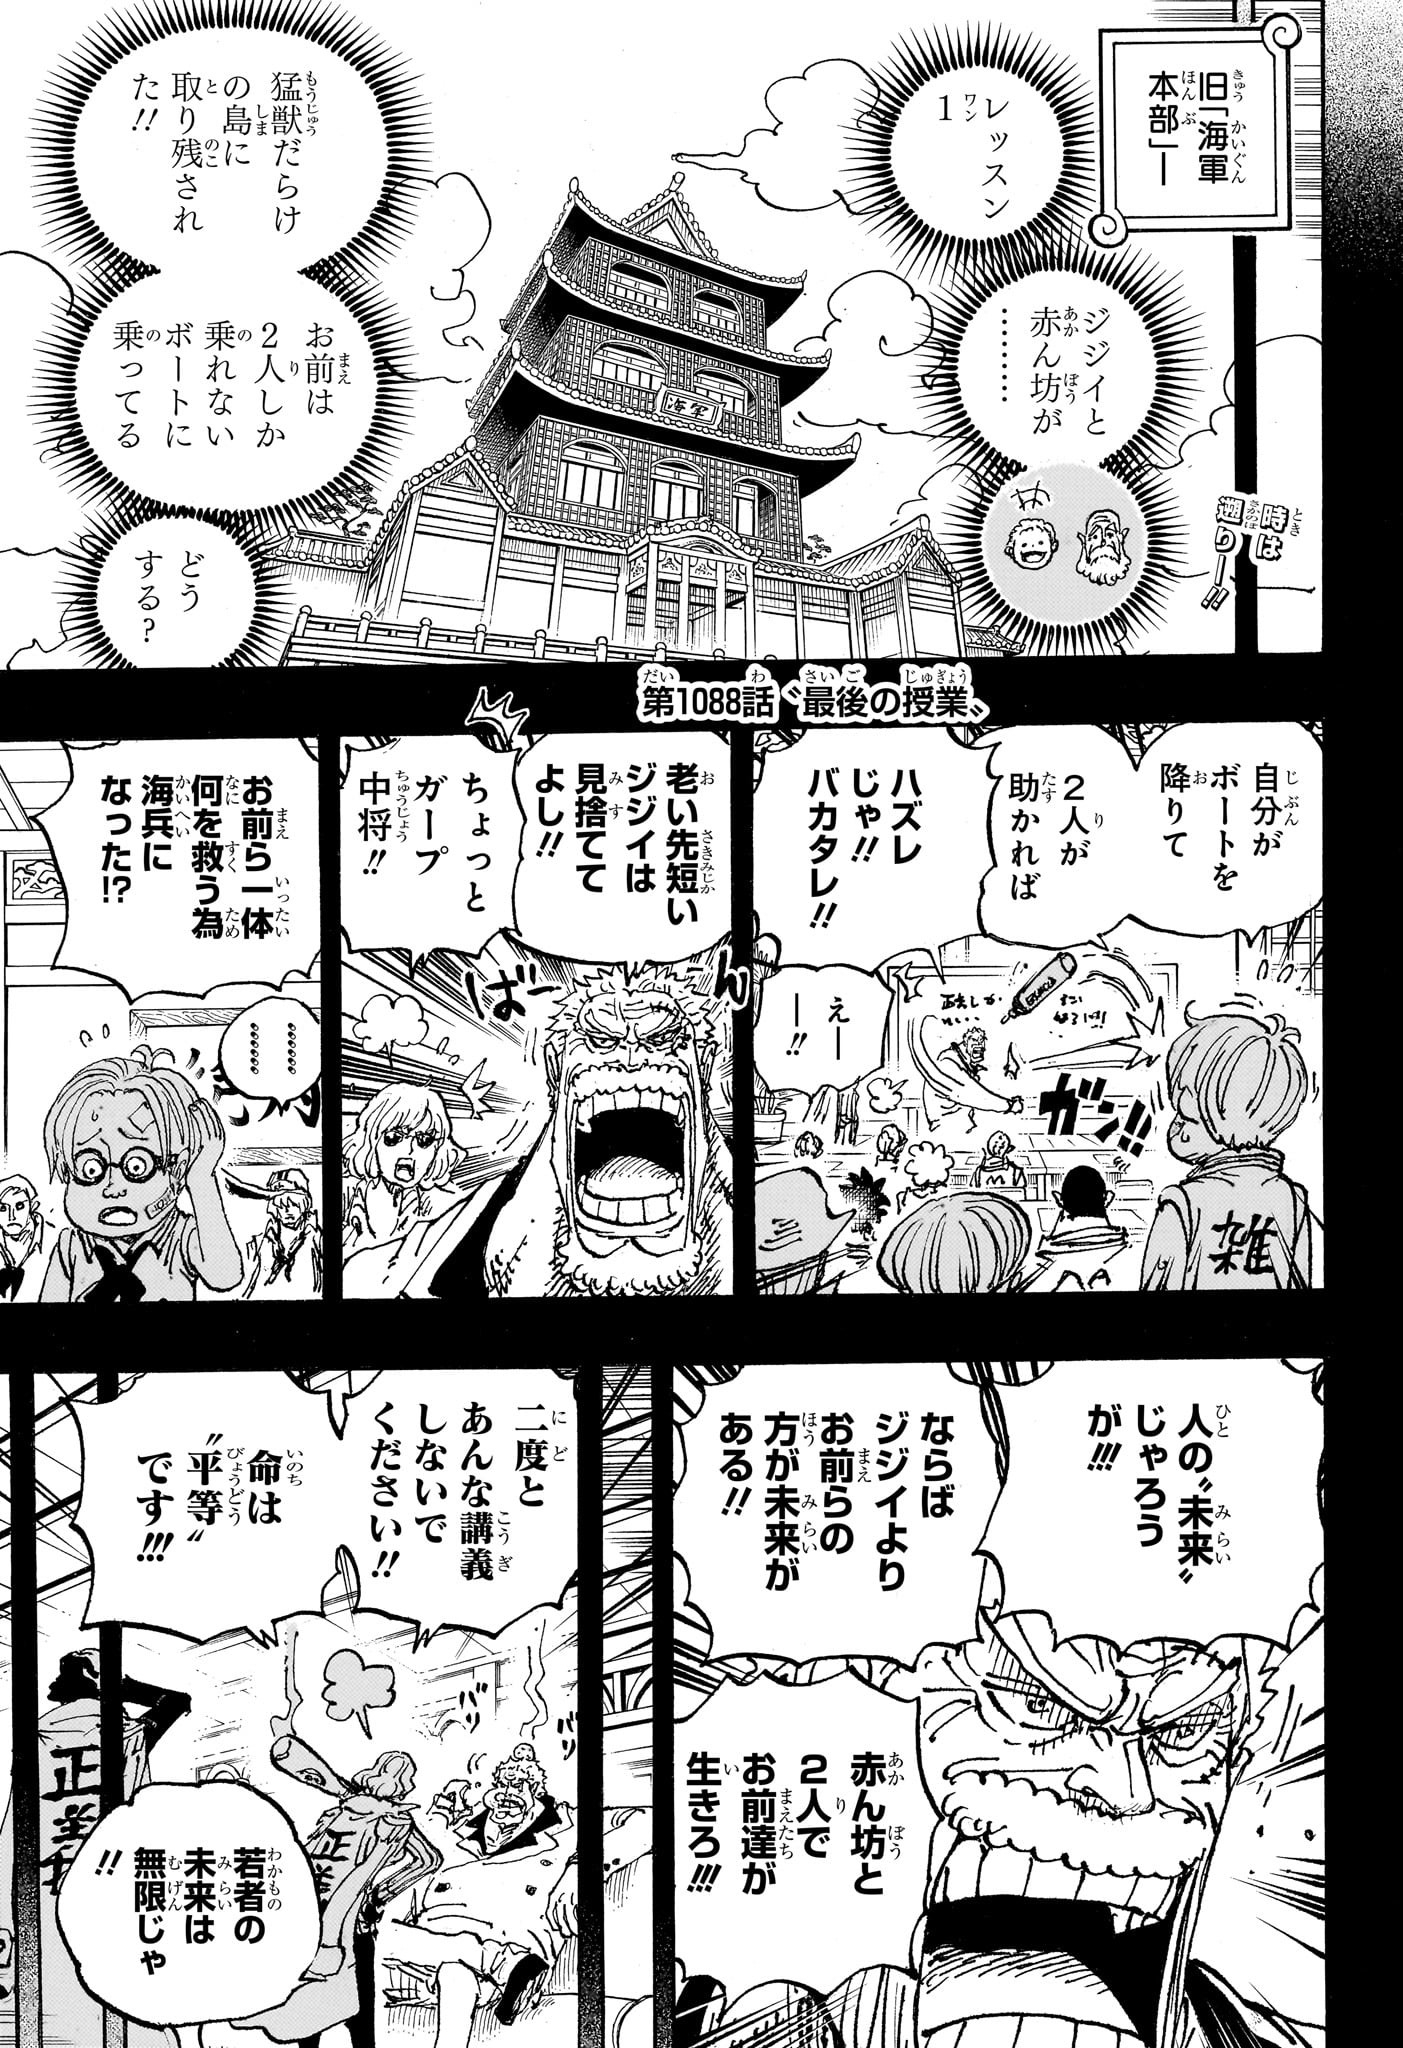 One Piece - Chapter 1088 - Page 2